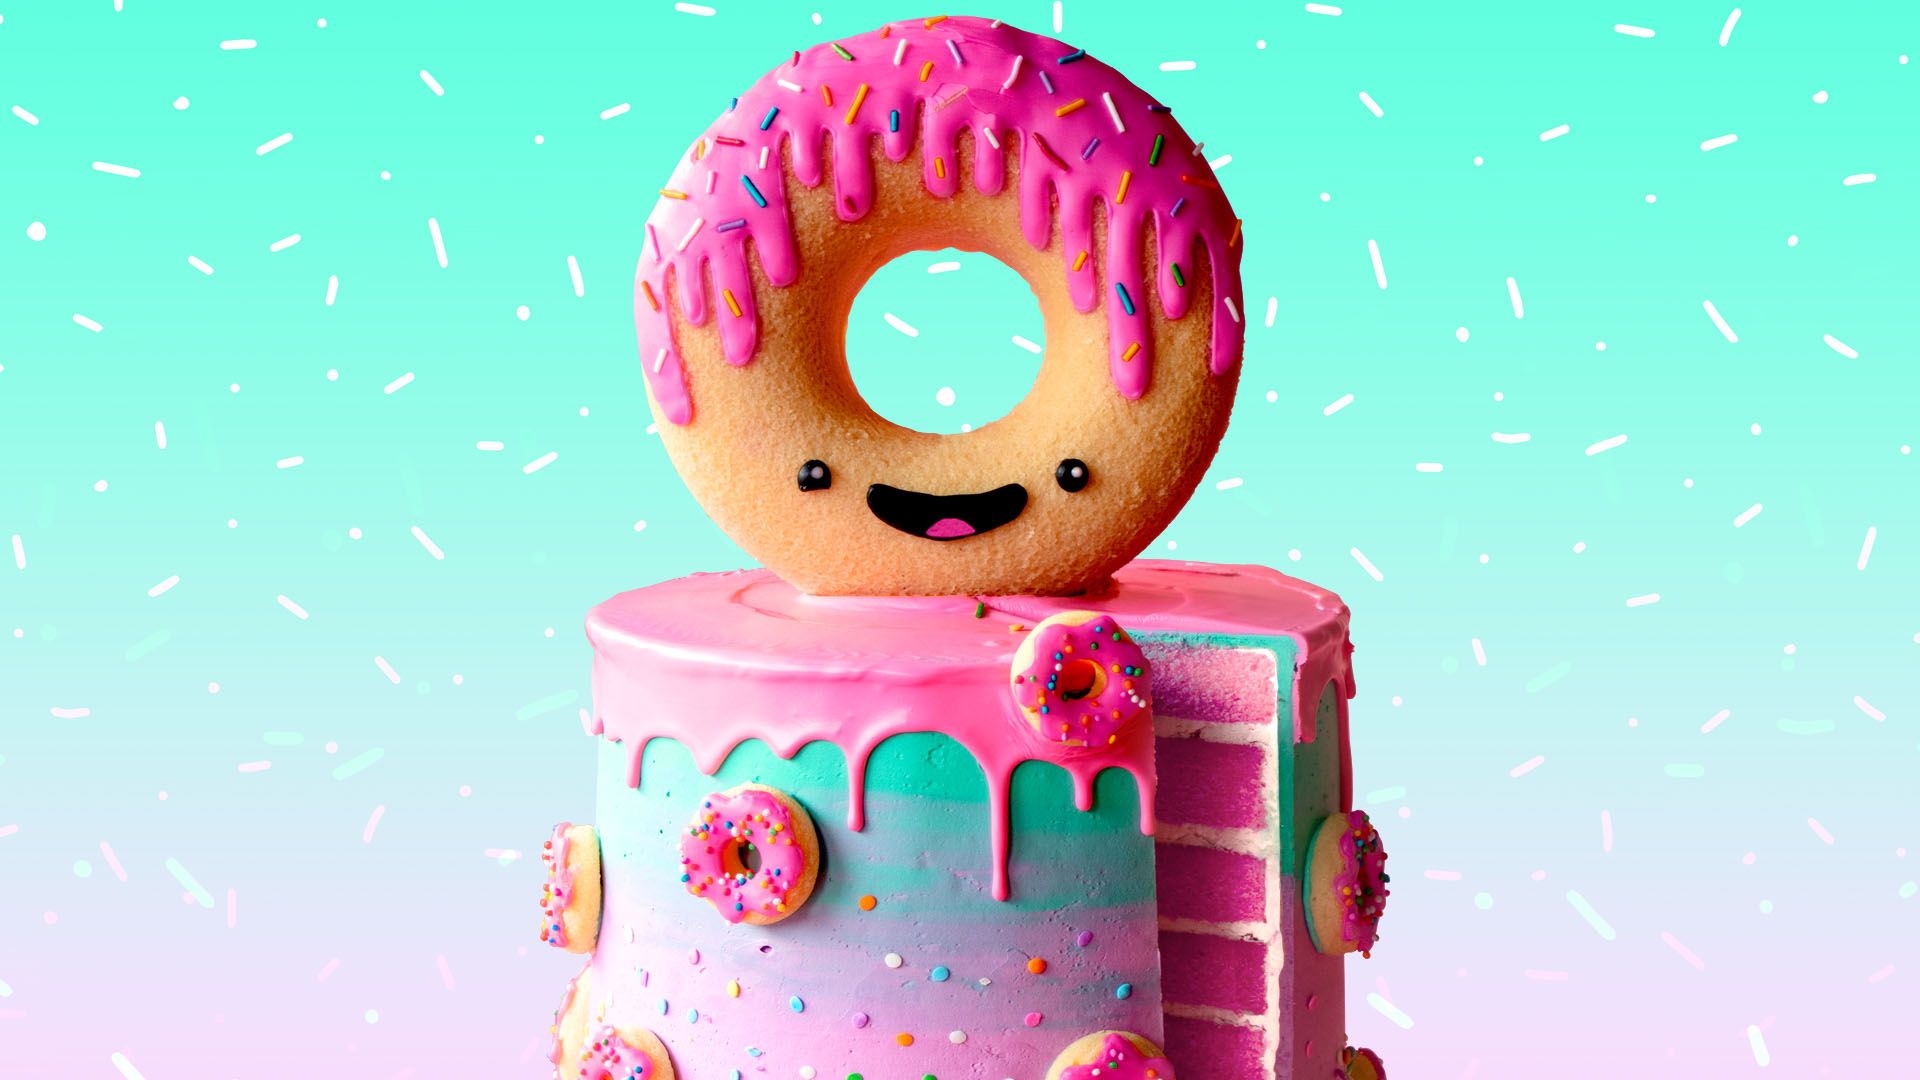 pictures of donut cakes